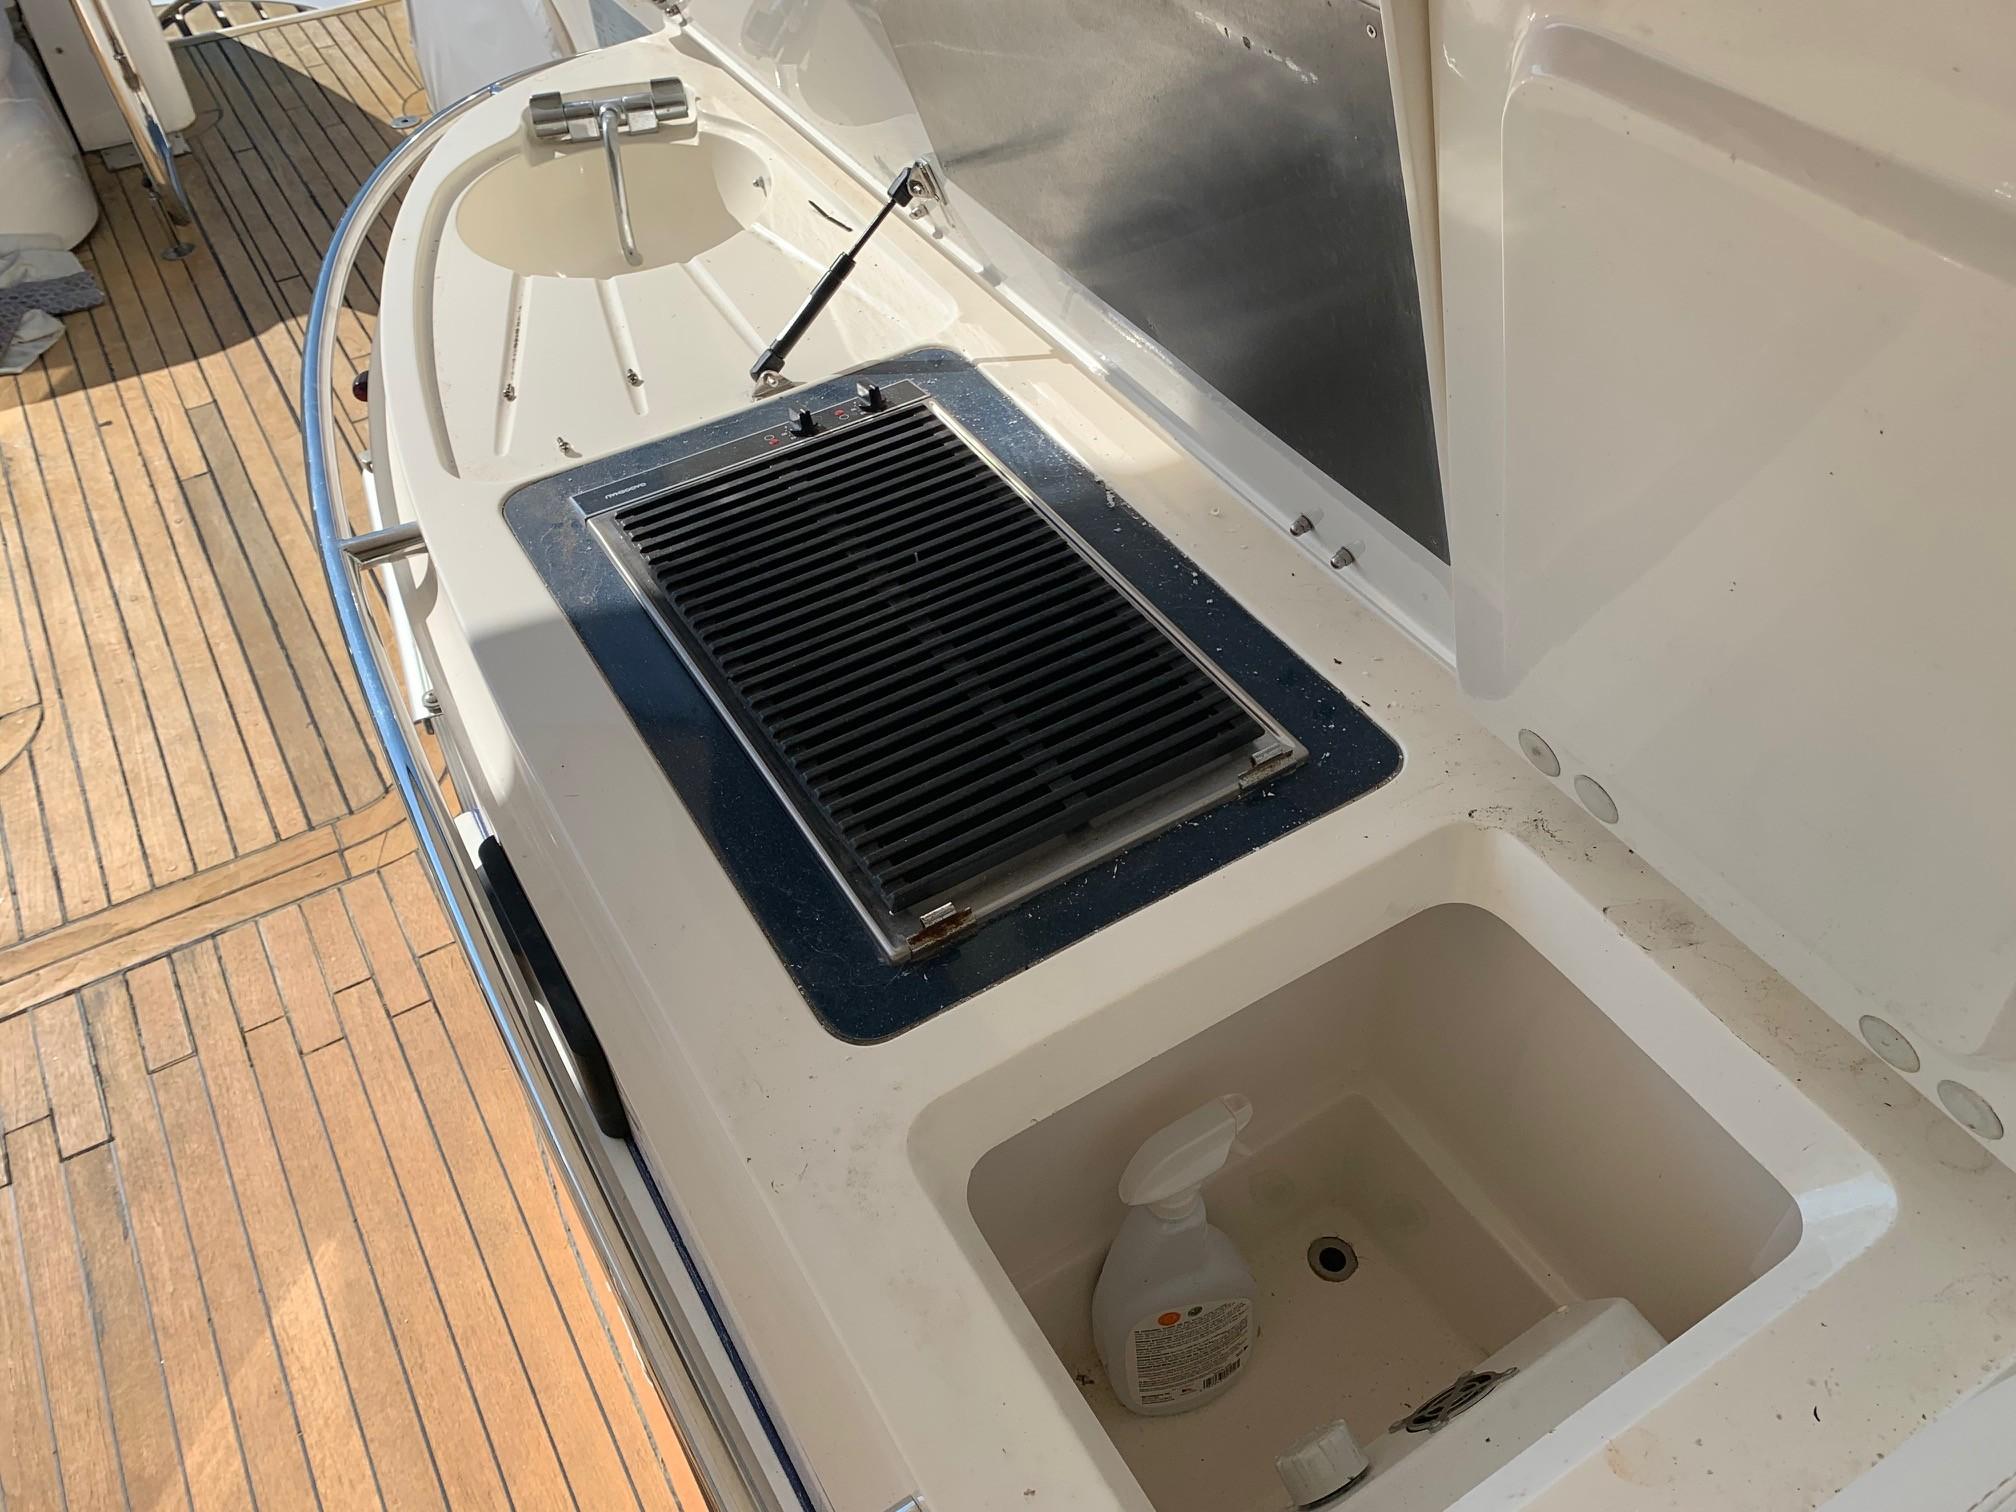 Cockpit Entertaining Area with Stove and Ice Maker